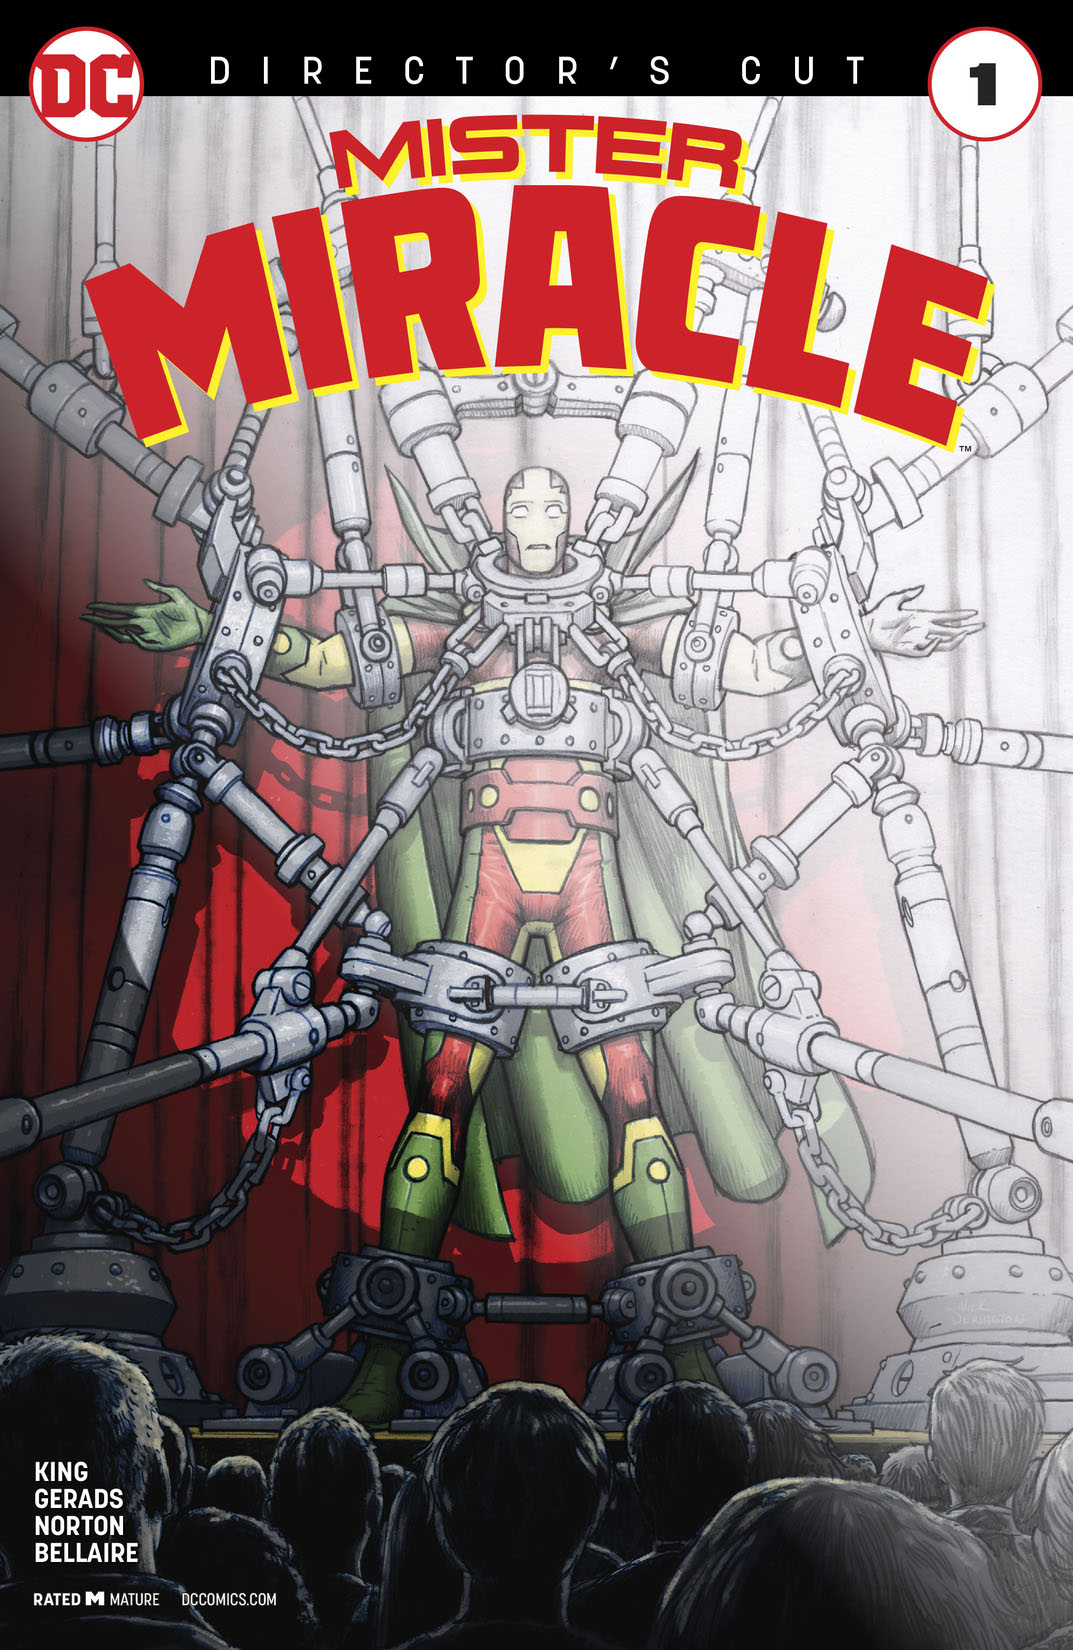 Mister Miracle #1 Director's Cut (2018-) #1 preview images